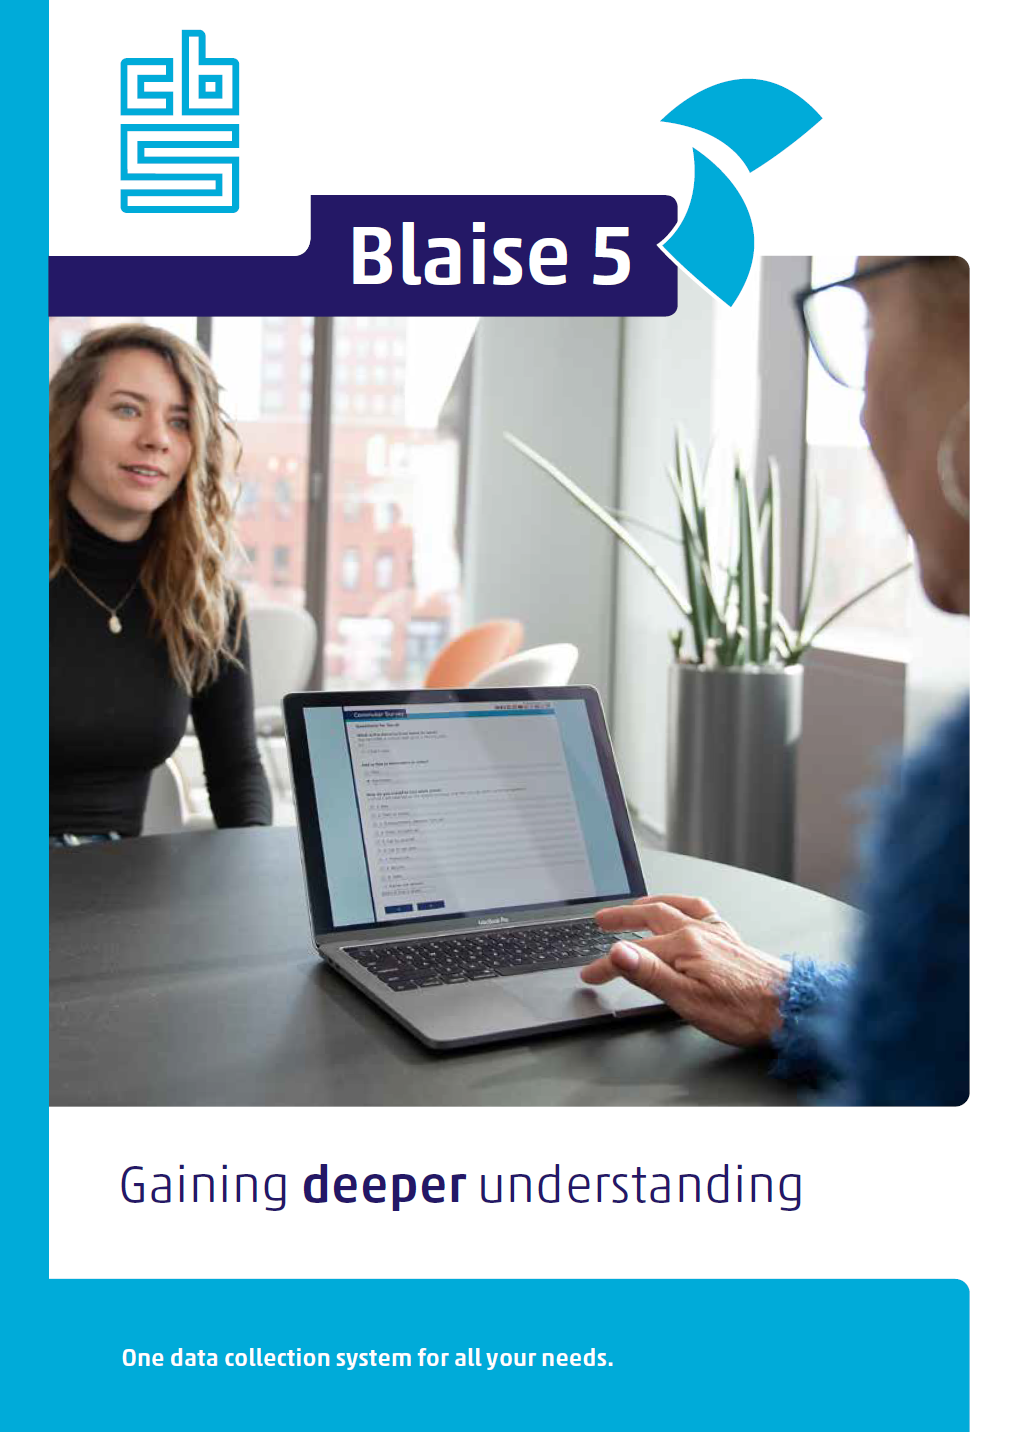 Blaise 5 - One data collection system for all your needs